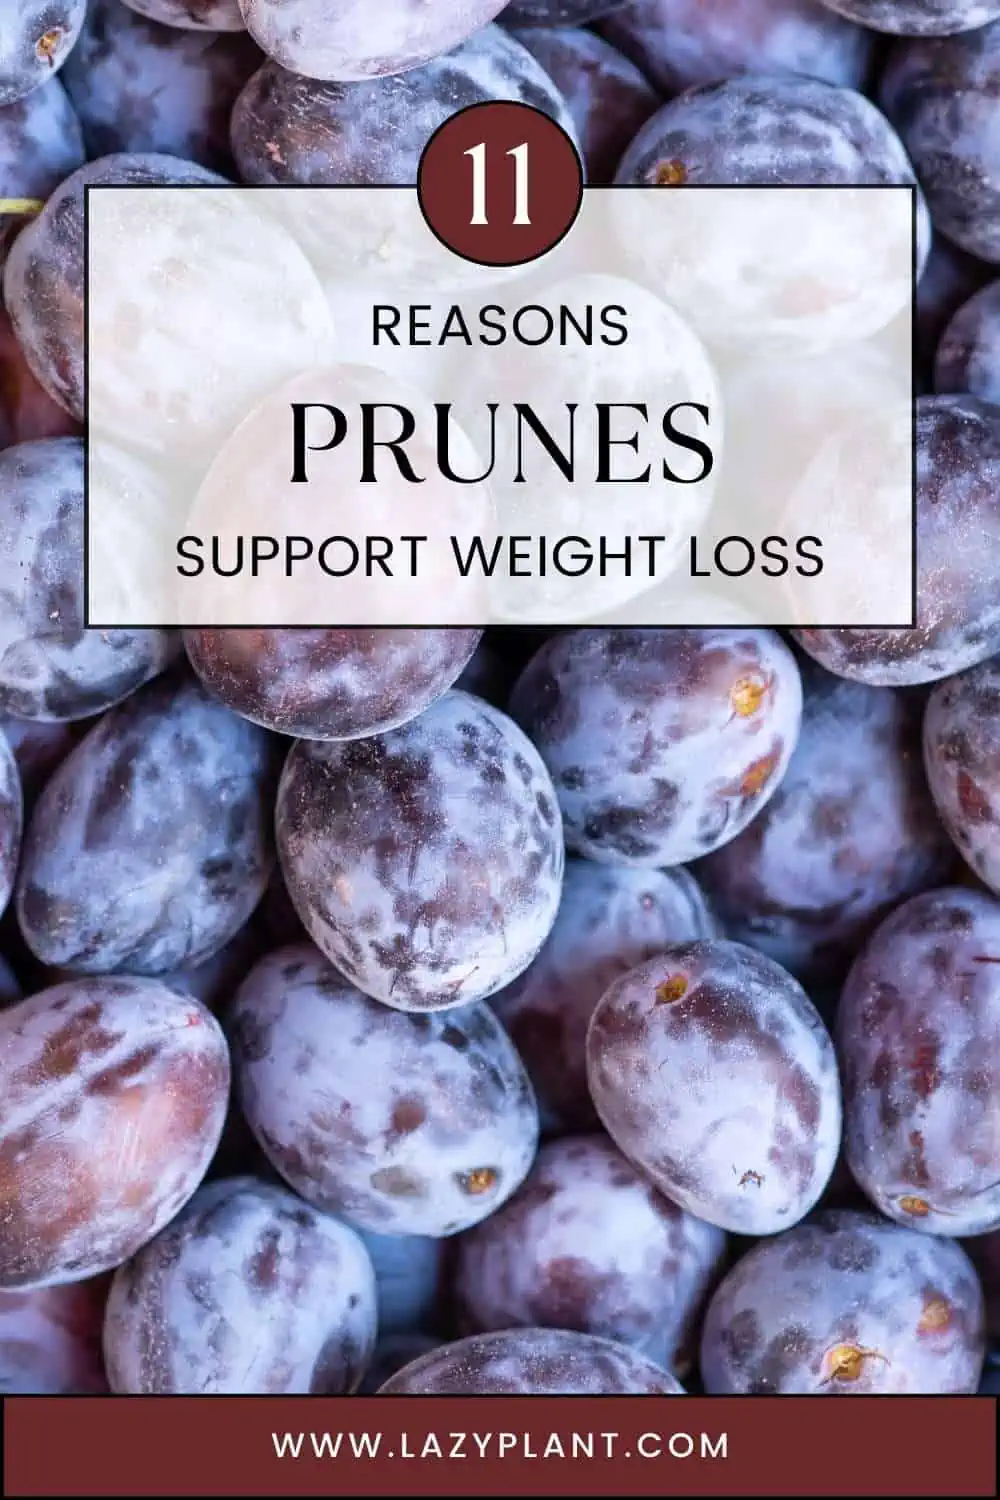 11 reasons why prunes are good for weight loss